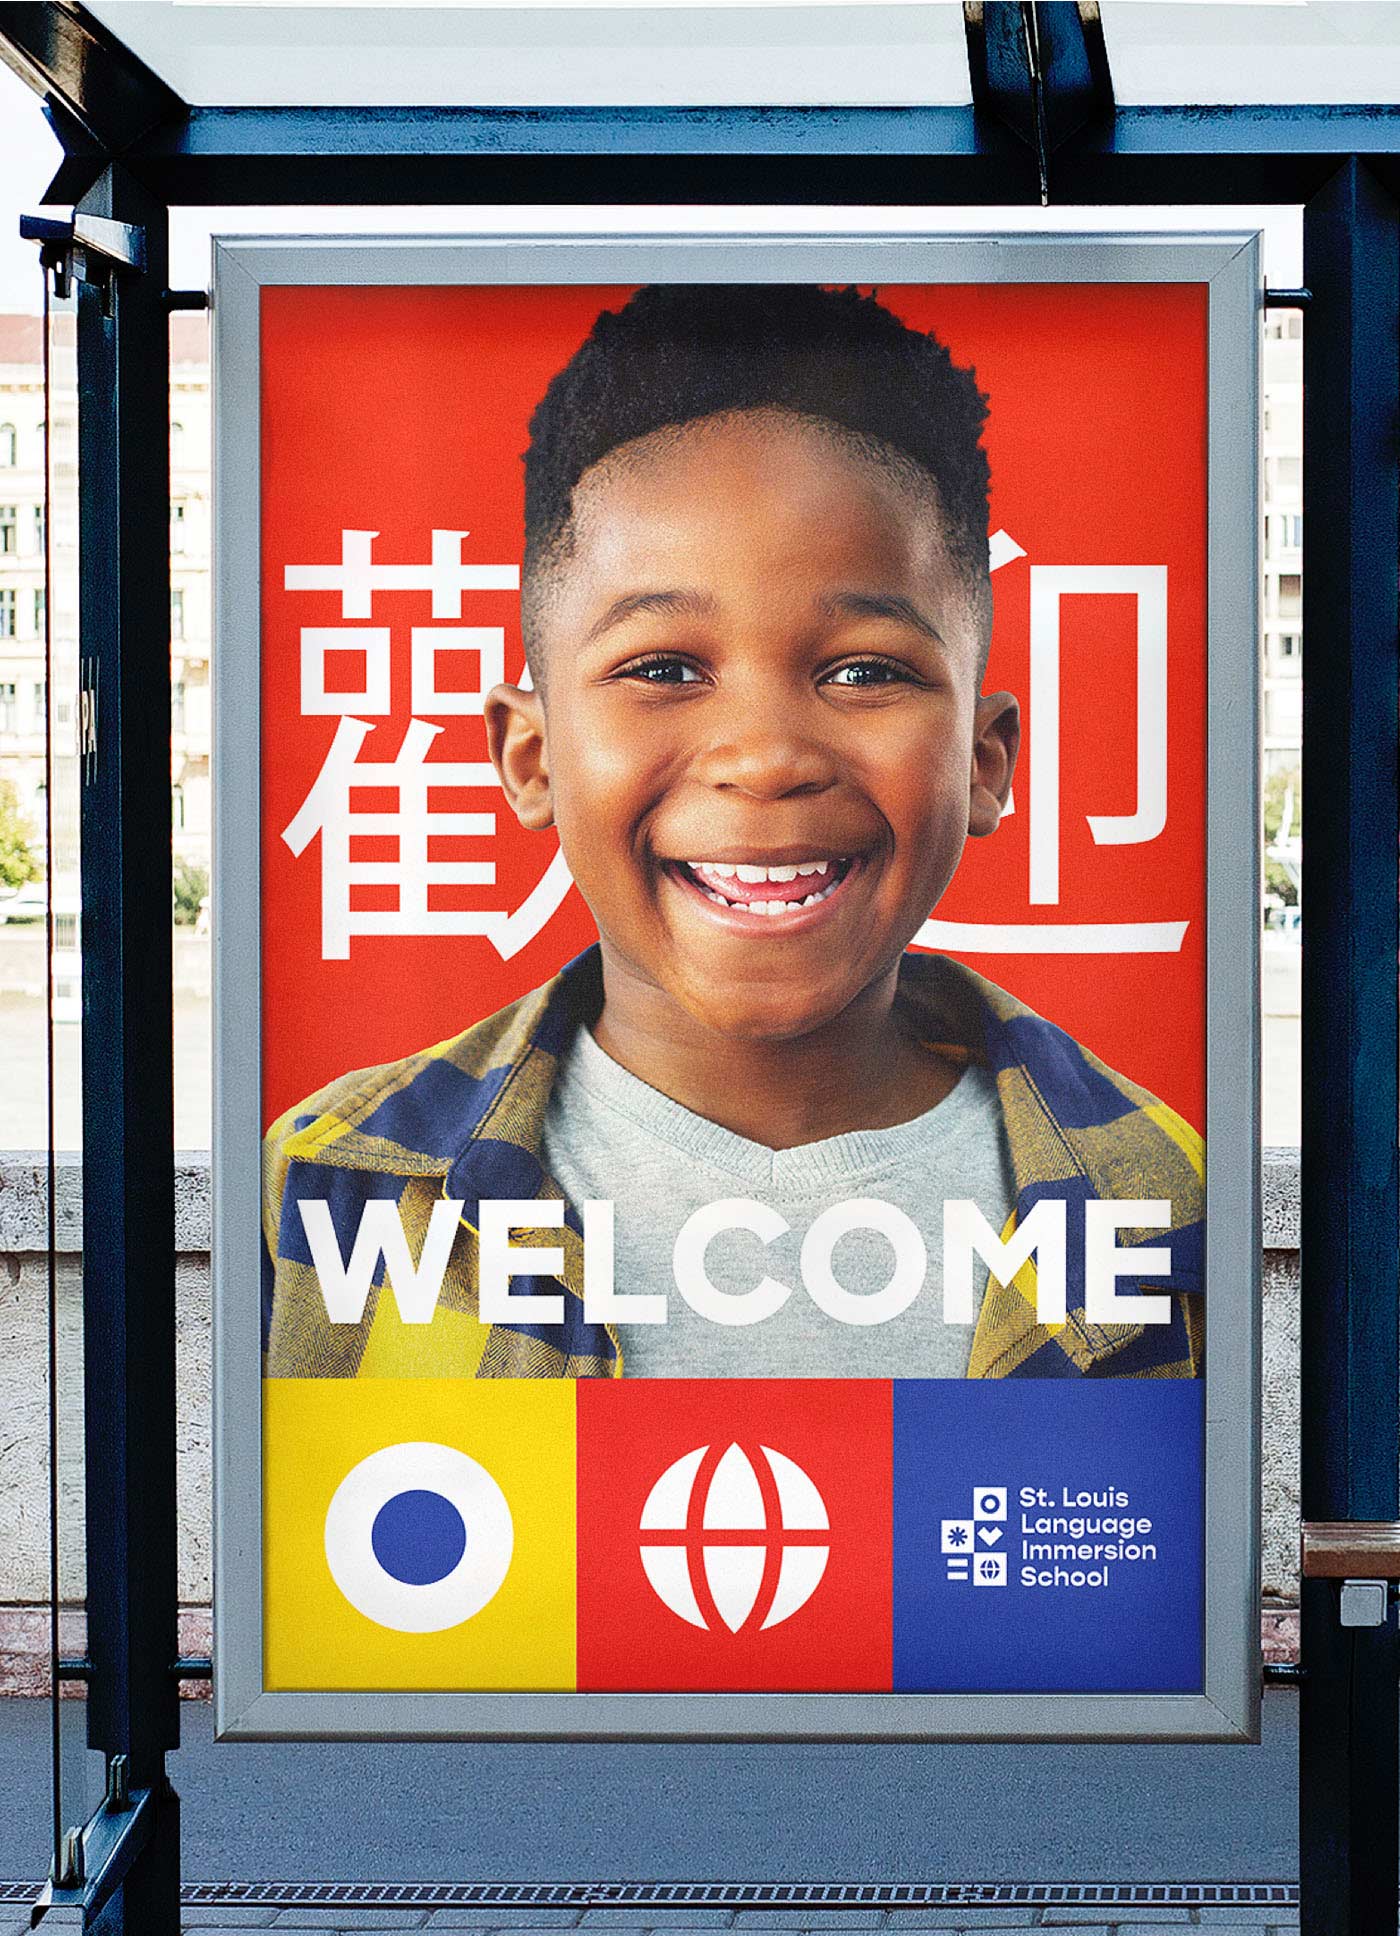 Creative expression showing how St. Louis Language Immersion School's new branding could live on a bus shelter ad